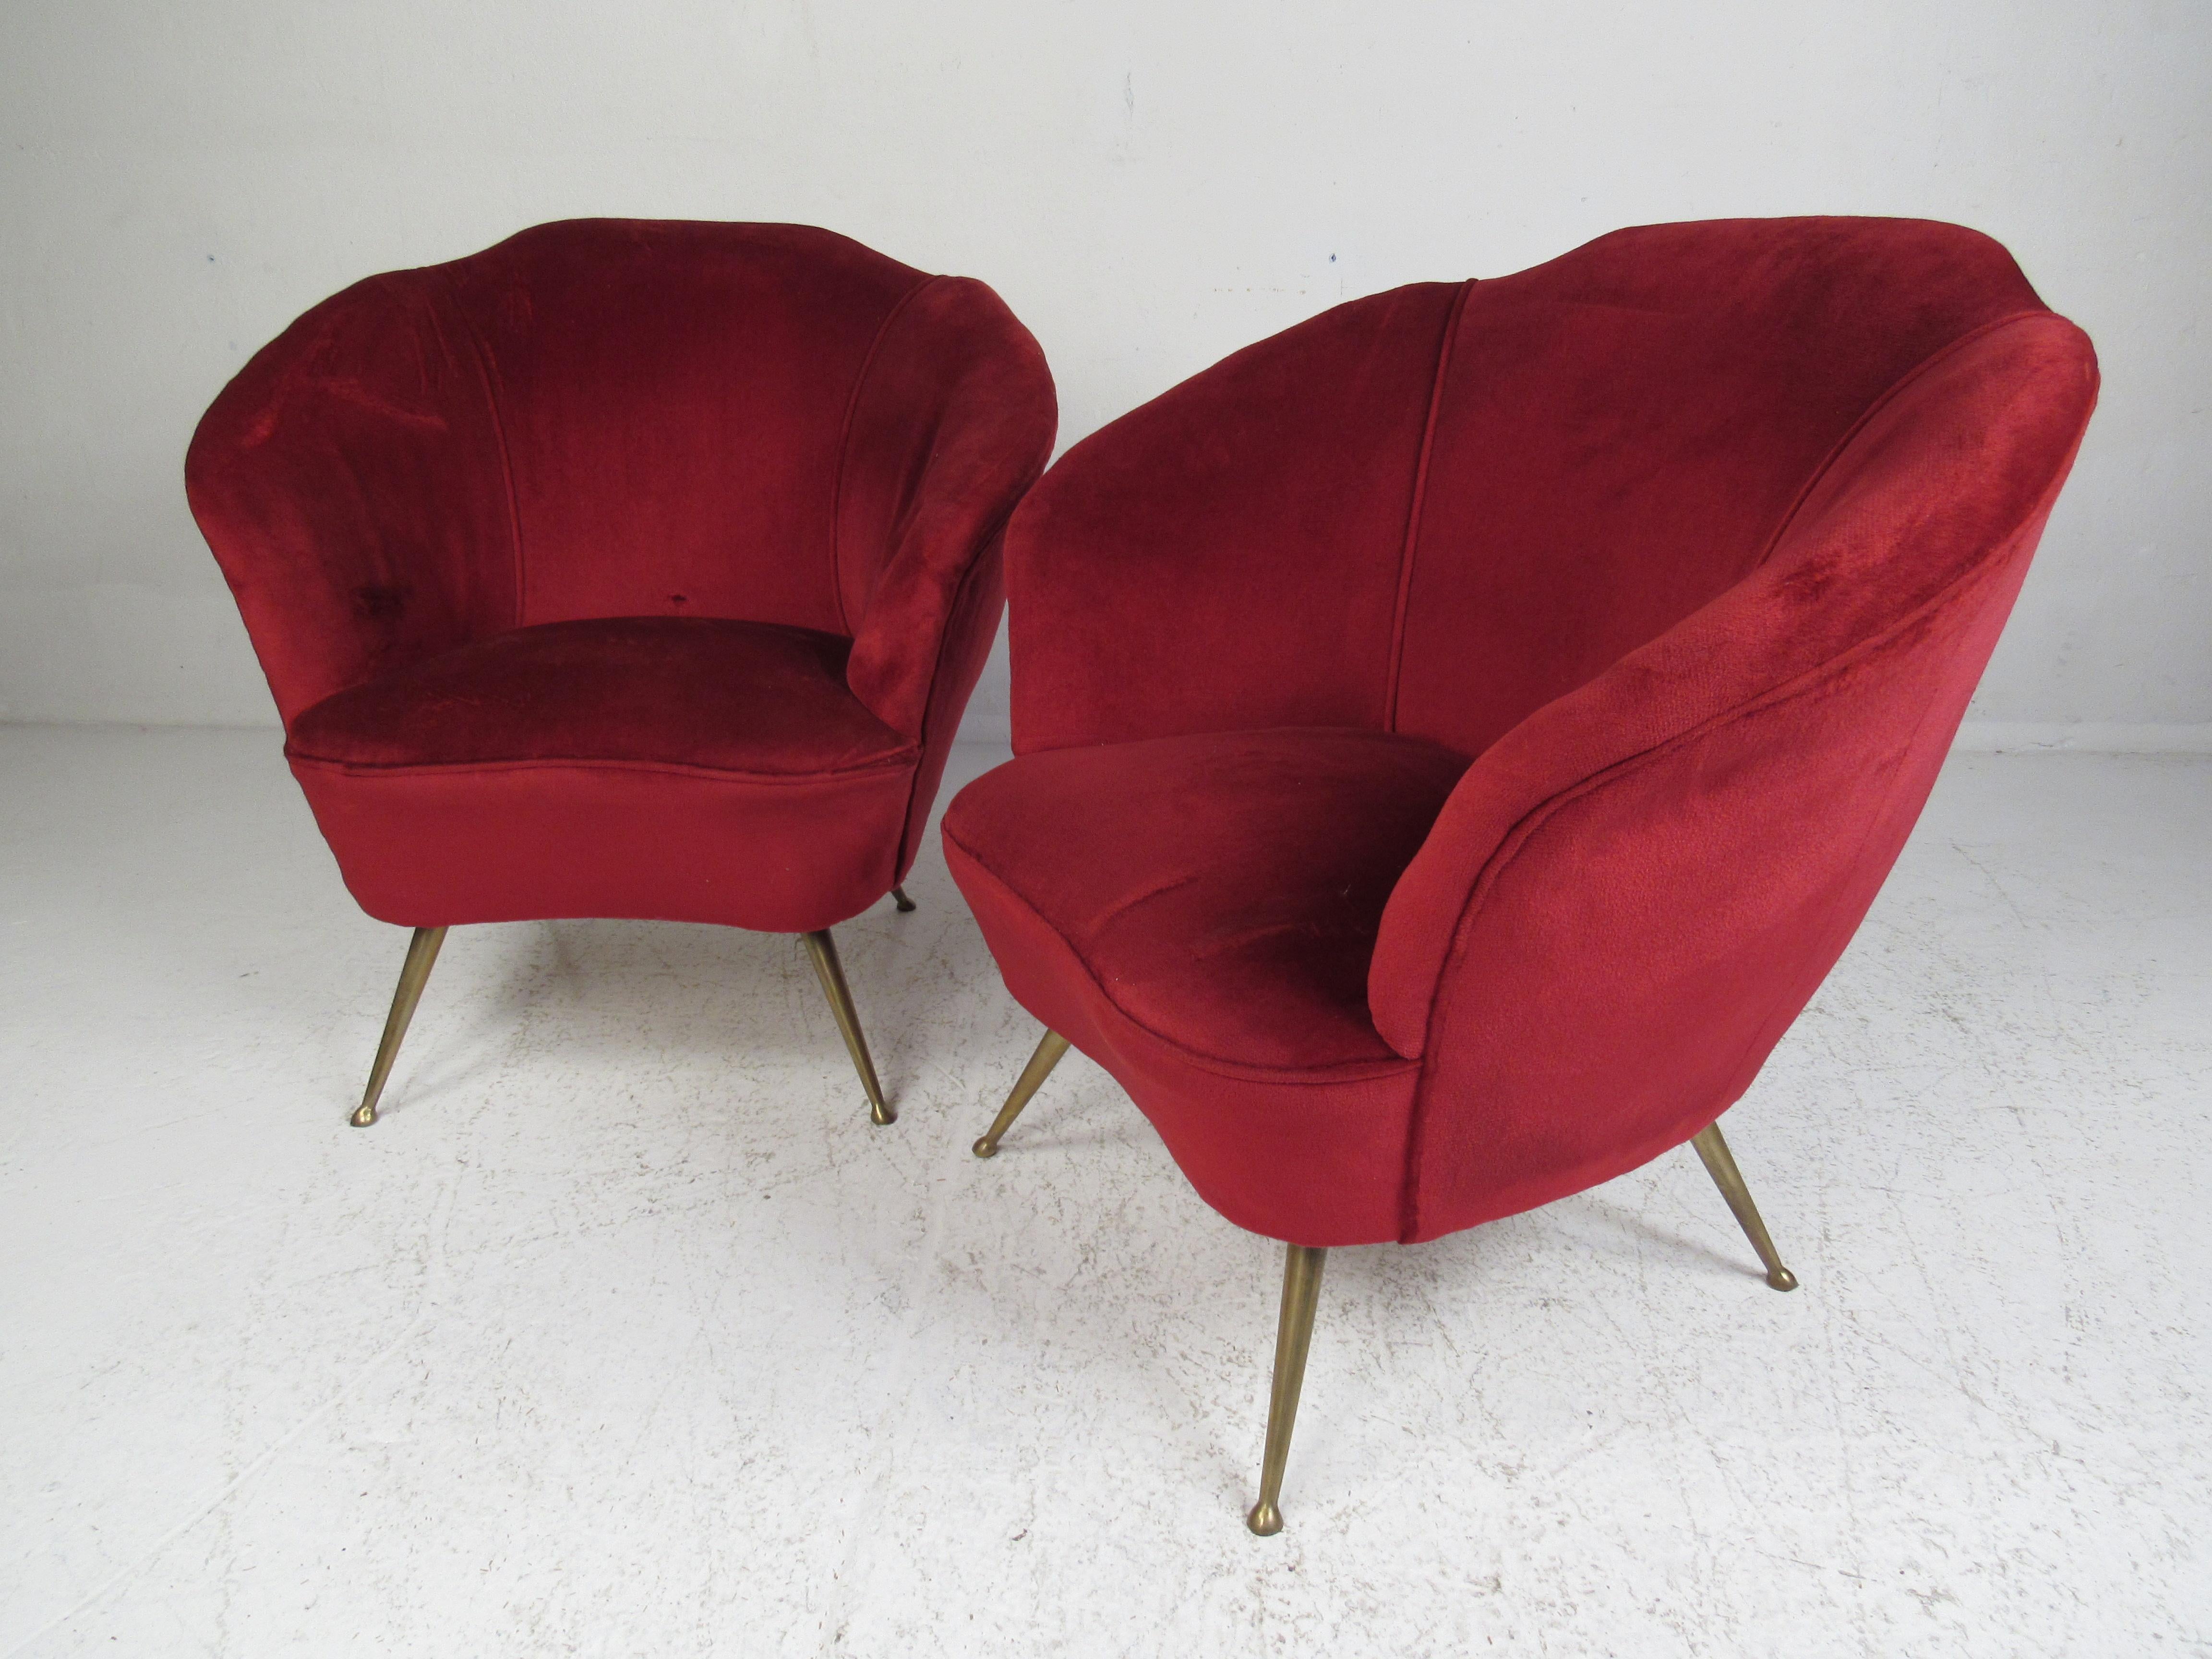 Stunning vintage modern living room set that includes two lounge chairs and a sofa. The red velour upholstery and brass drumstick legs are sure to make an impression in any seating arrangement. A sleek design that features shell barrel backrests and